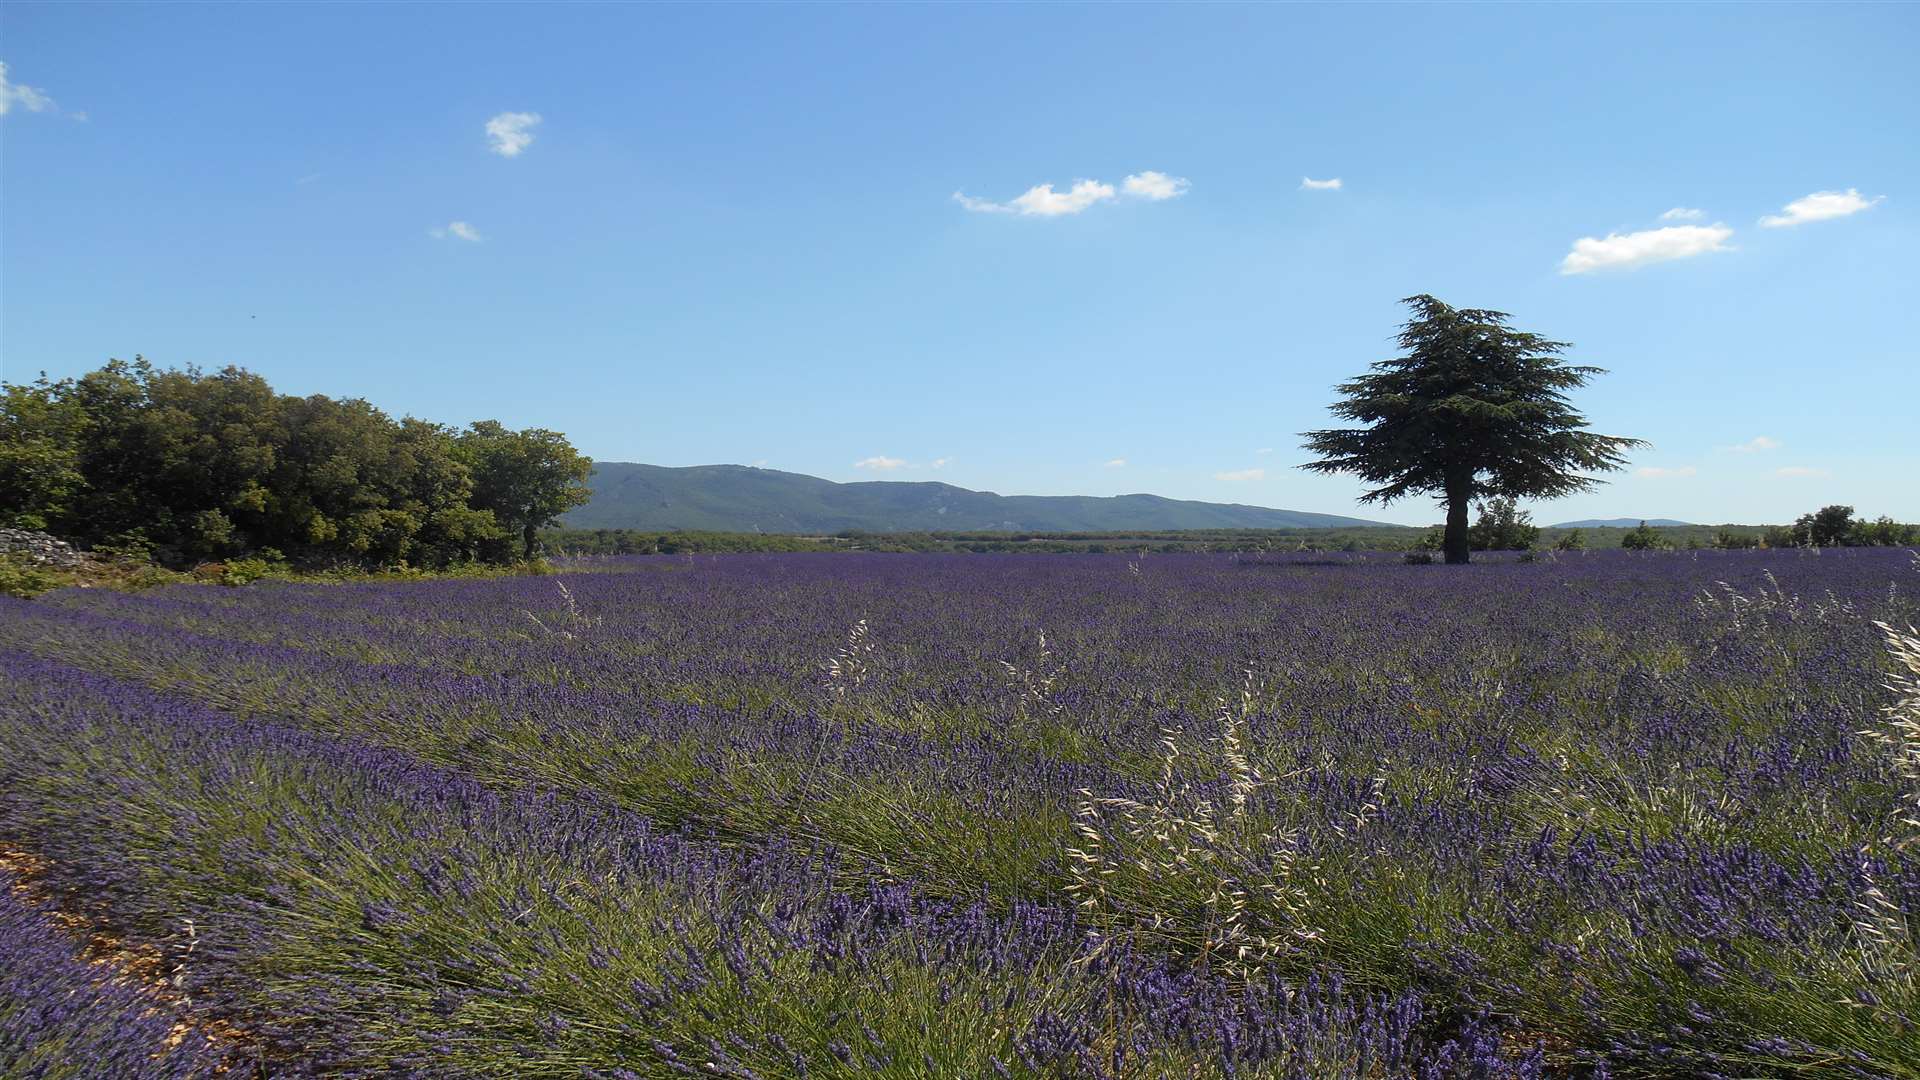 A field of lavender in full bloom on the way to the town of Apt in northern Luberon